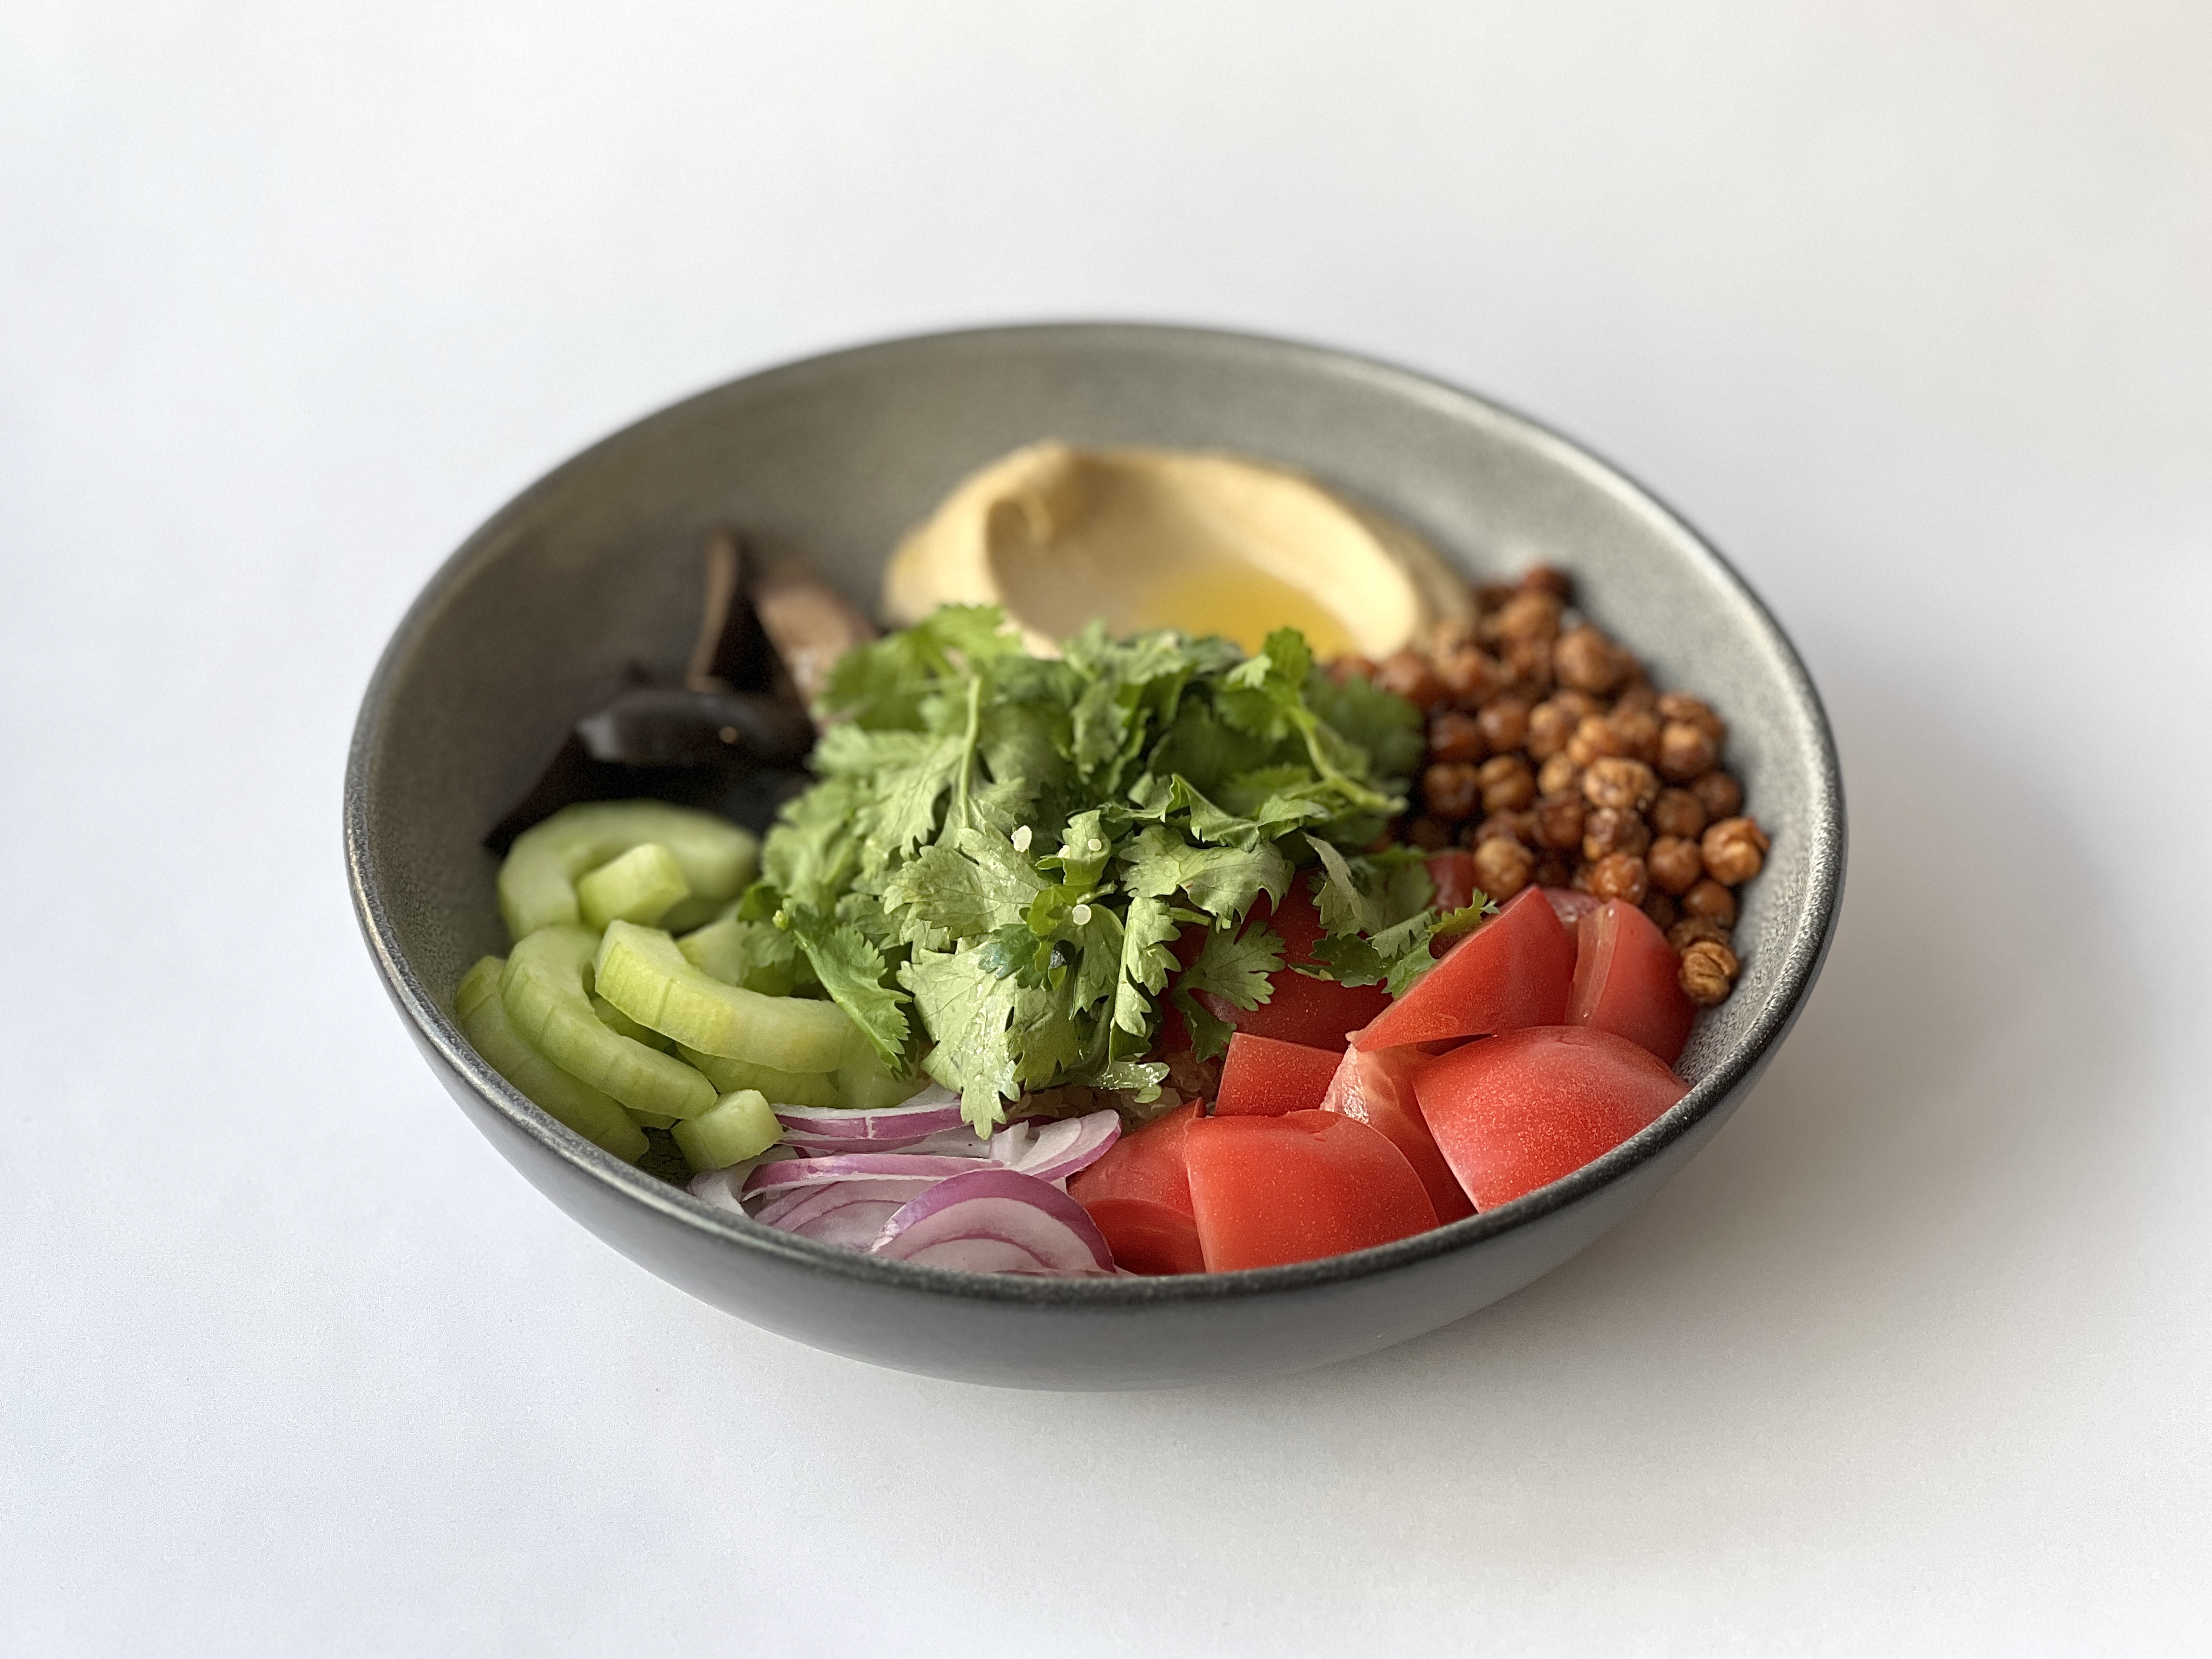 Hummus, roasted chickpeas, pink tomatoes, red onion,<br>olives, quinoa, cucumbers<br><br>